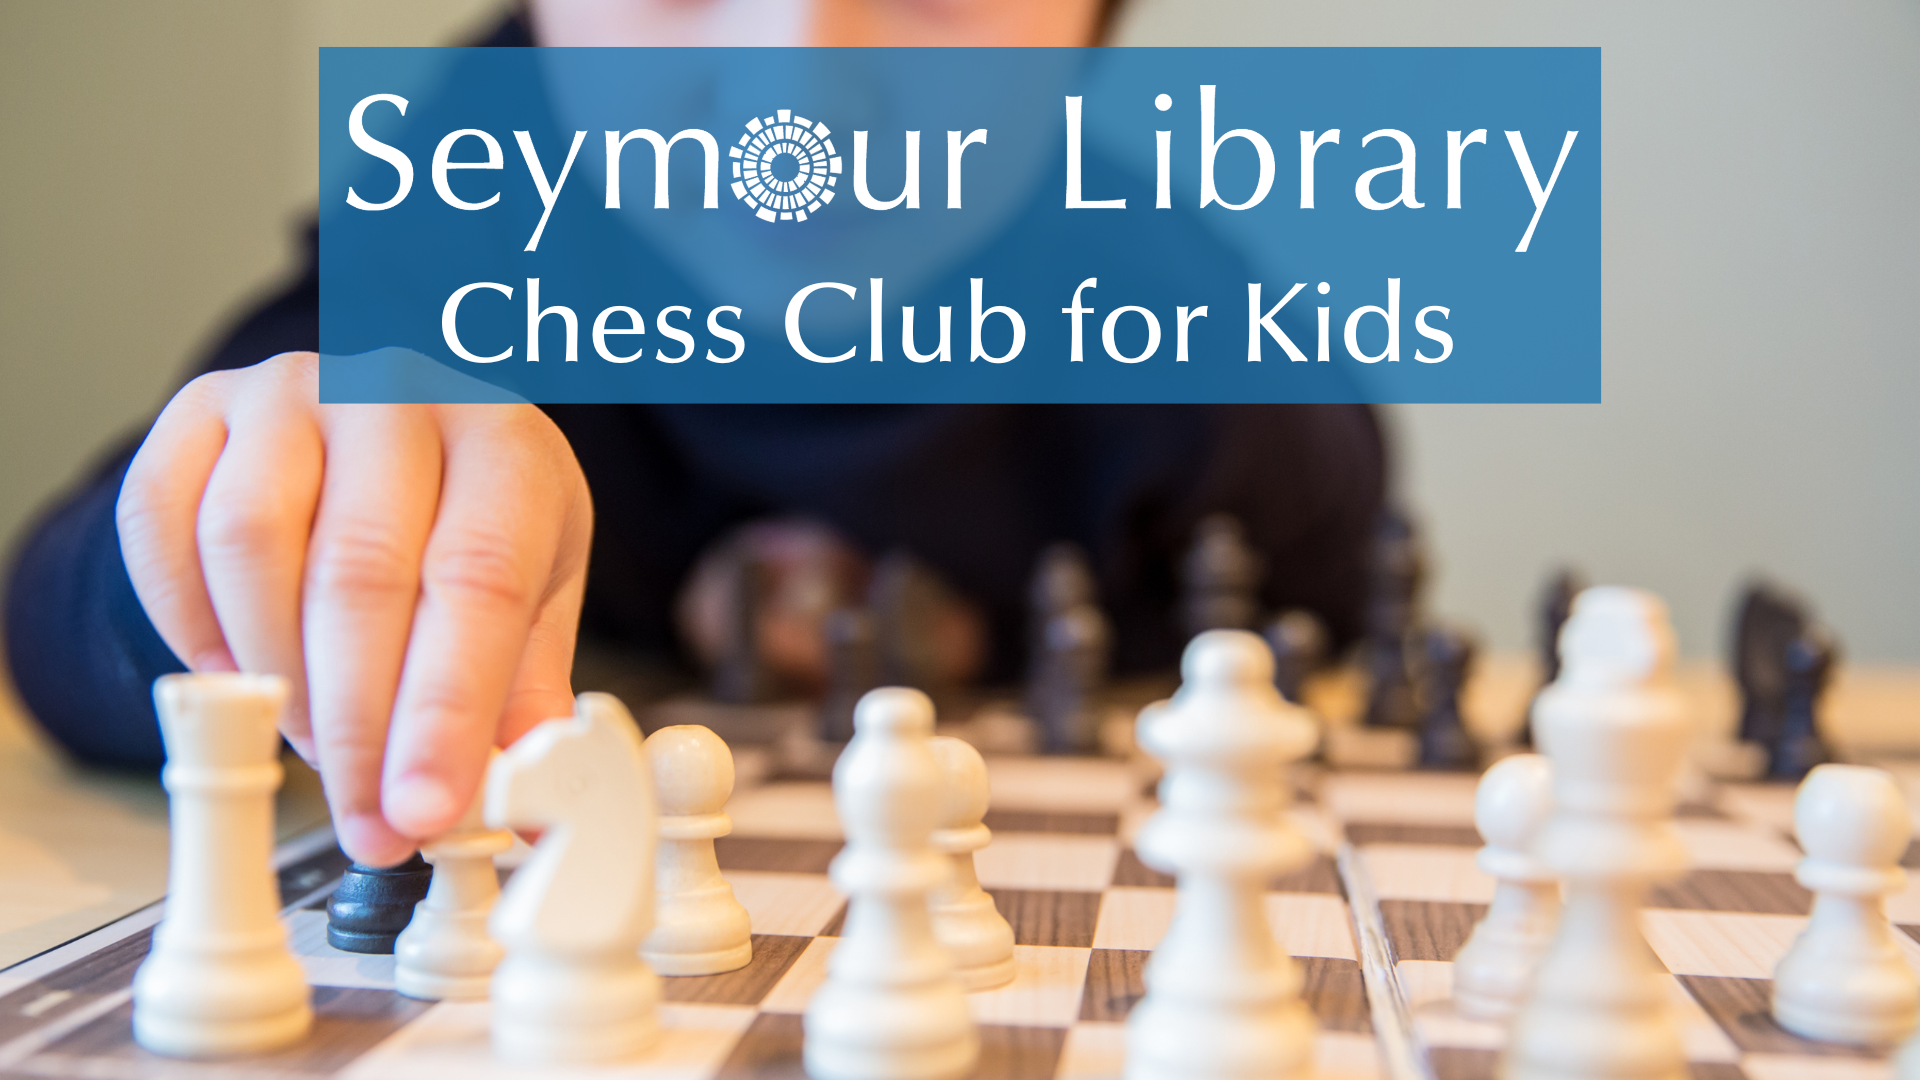 Chess Club for Kids at Seymour Library - image of child playing chess